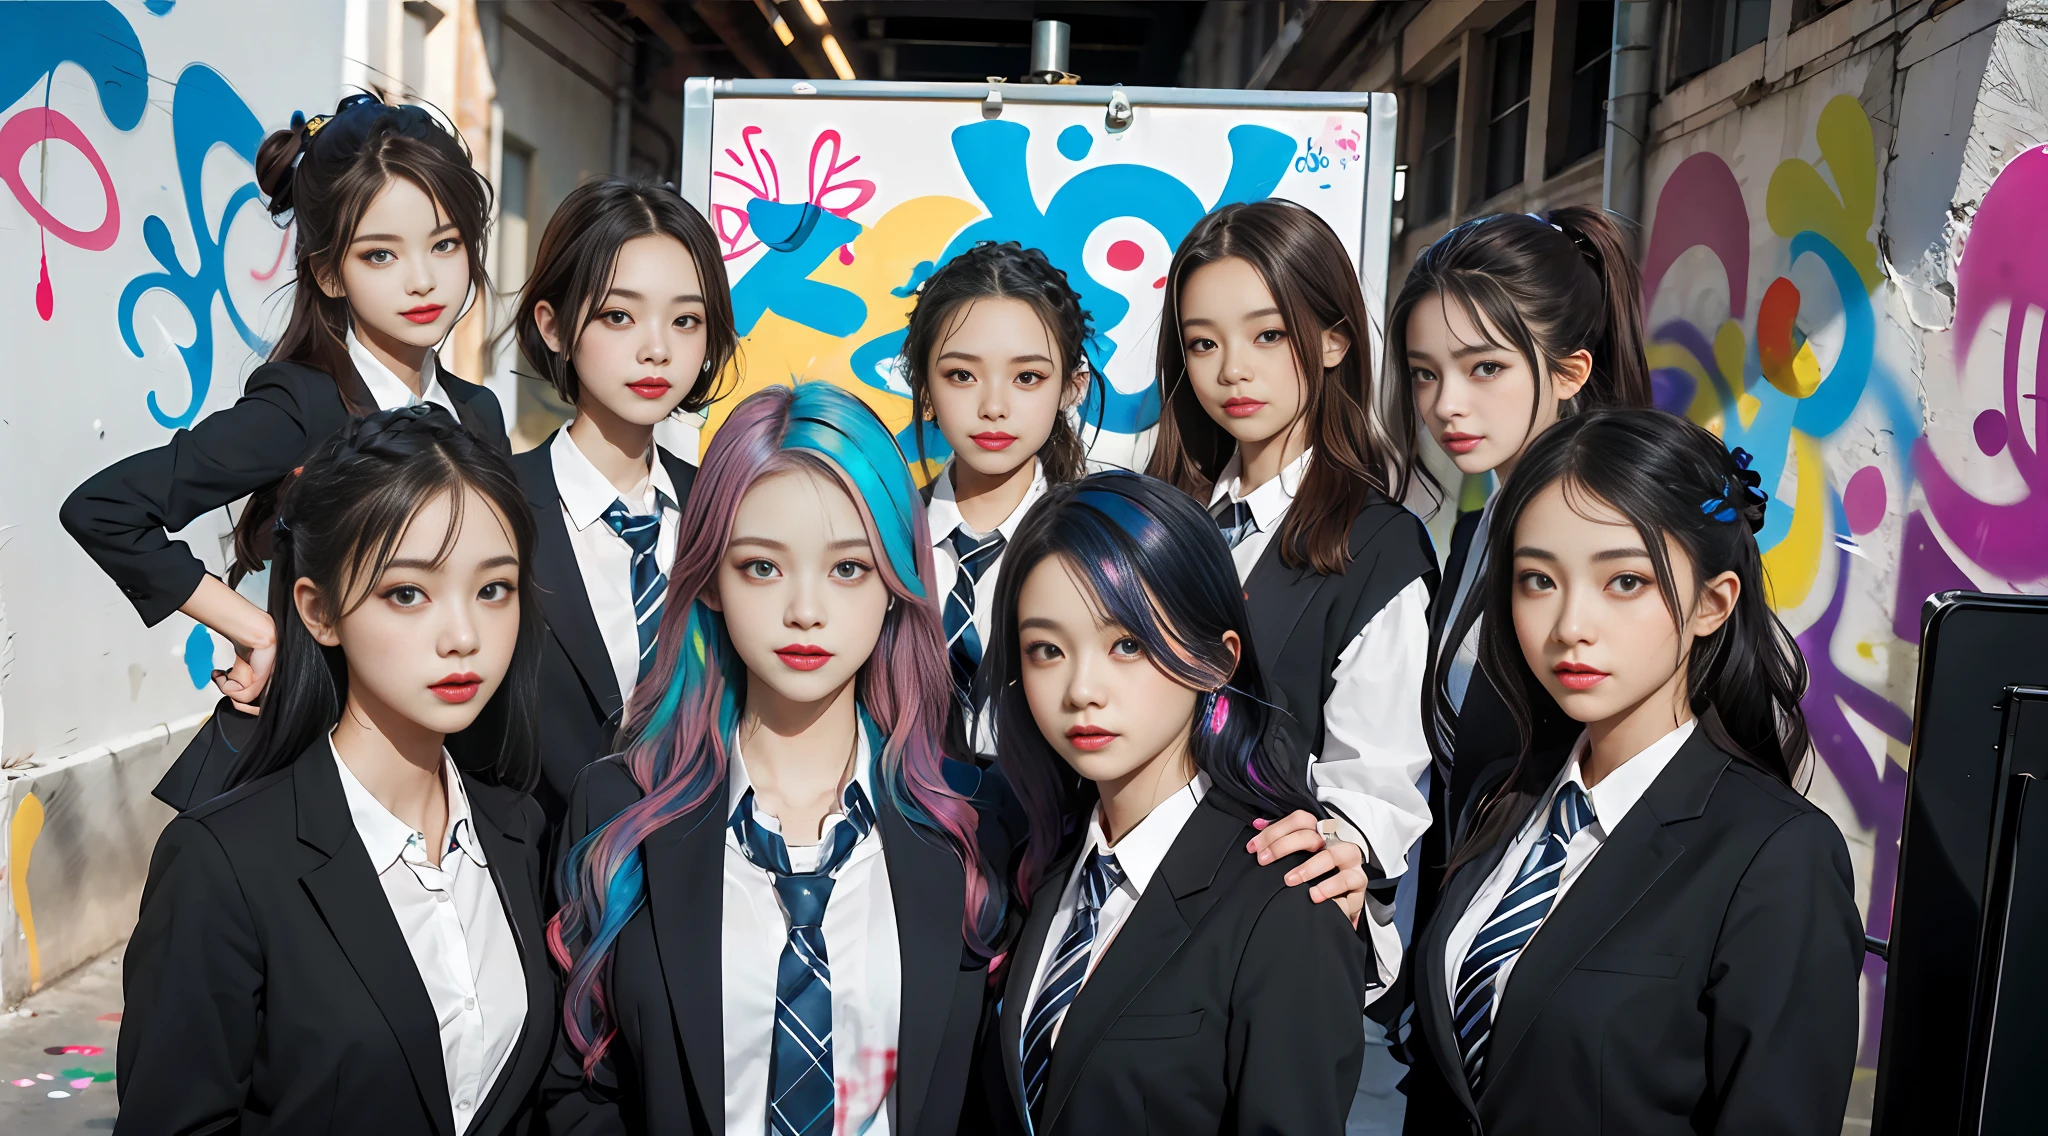 schoolgirl, beautiful detailed eyes, colorful, vivid colors, ((7girls: 1.5)), absurdity, top quality, striped hair, , latest fashion, (graffiti: 1.25), paint splatter, iridescent hair, paint on body